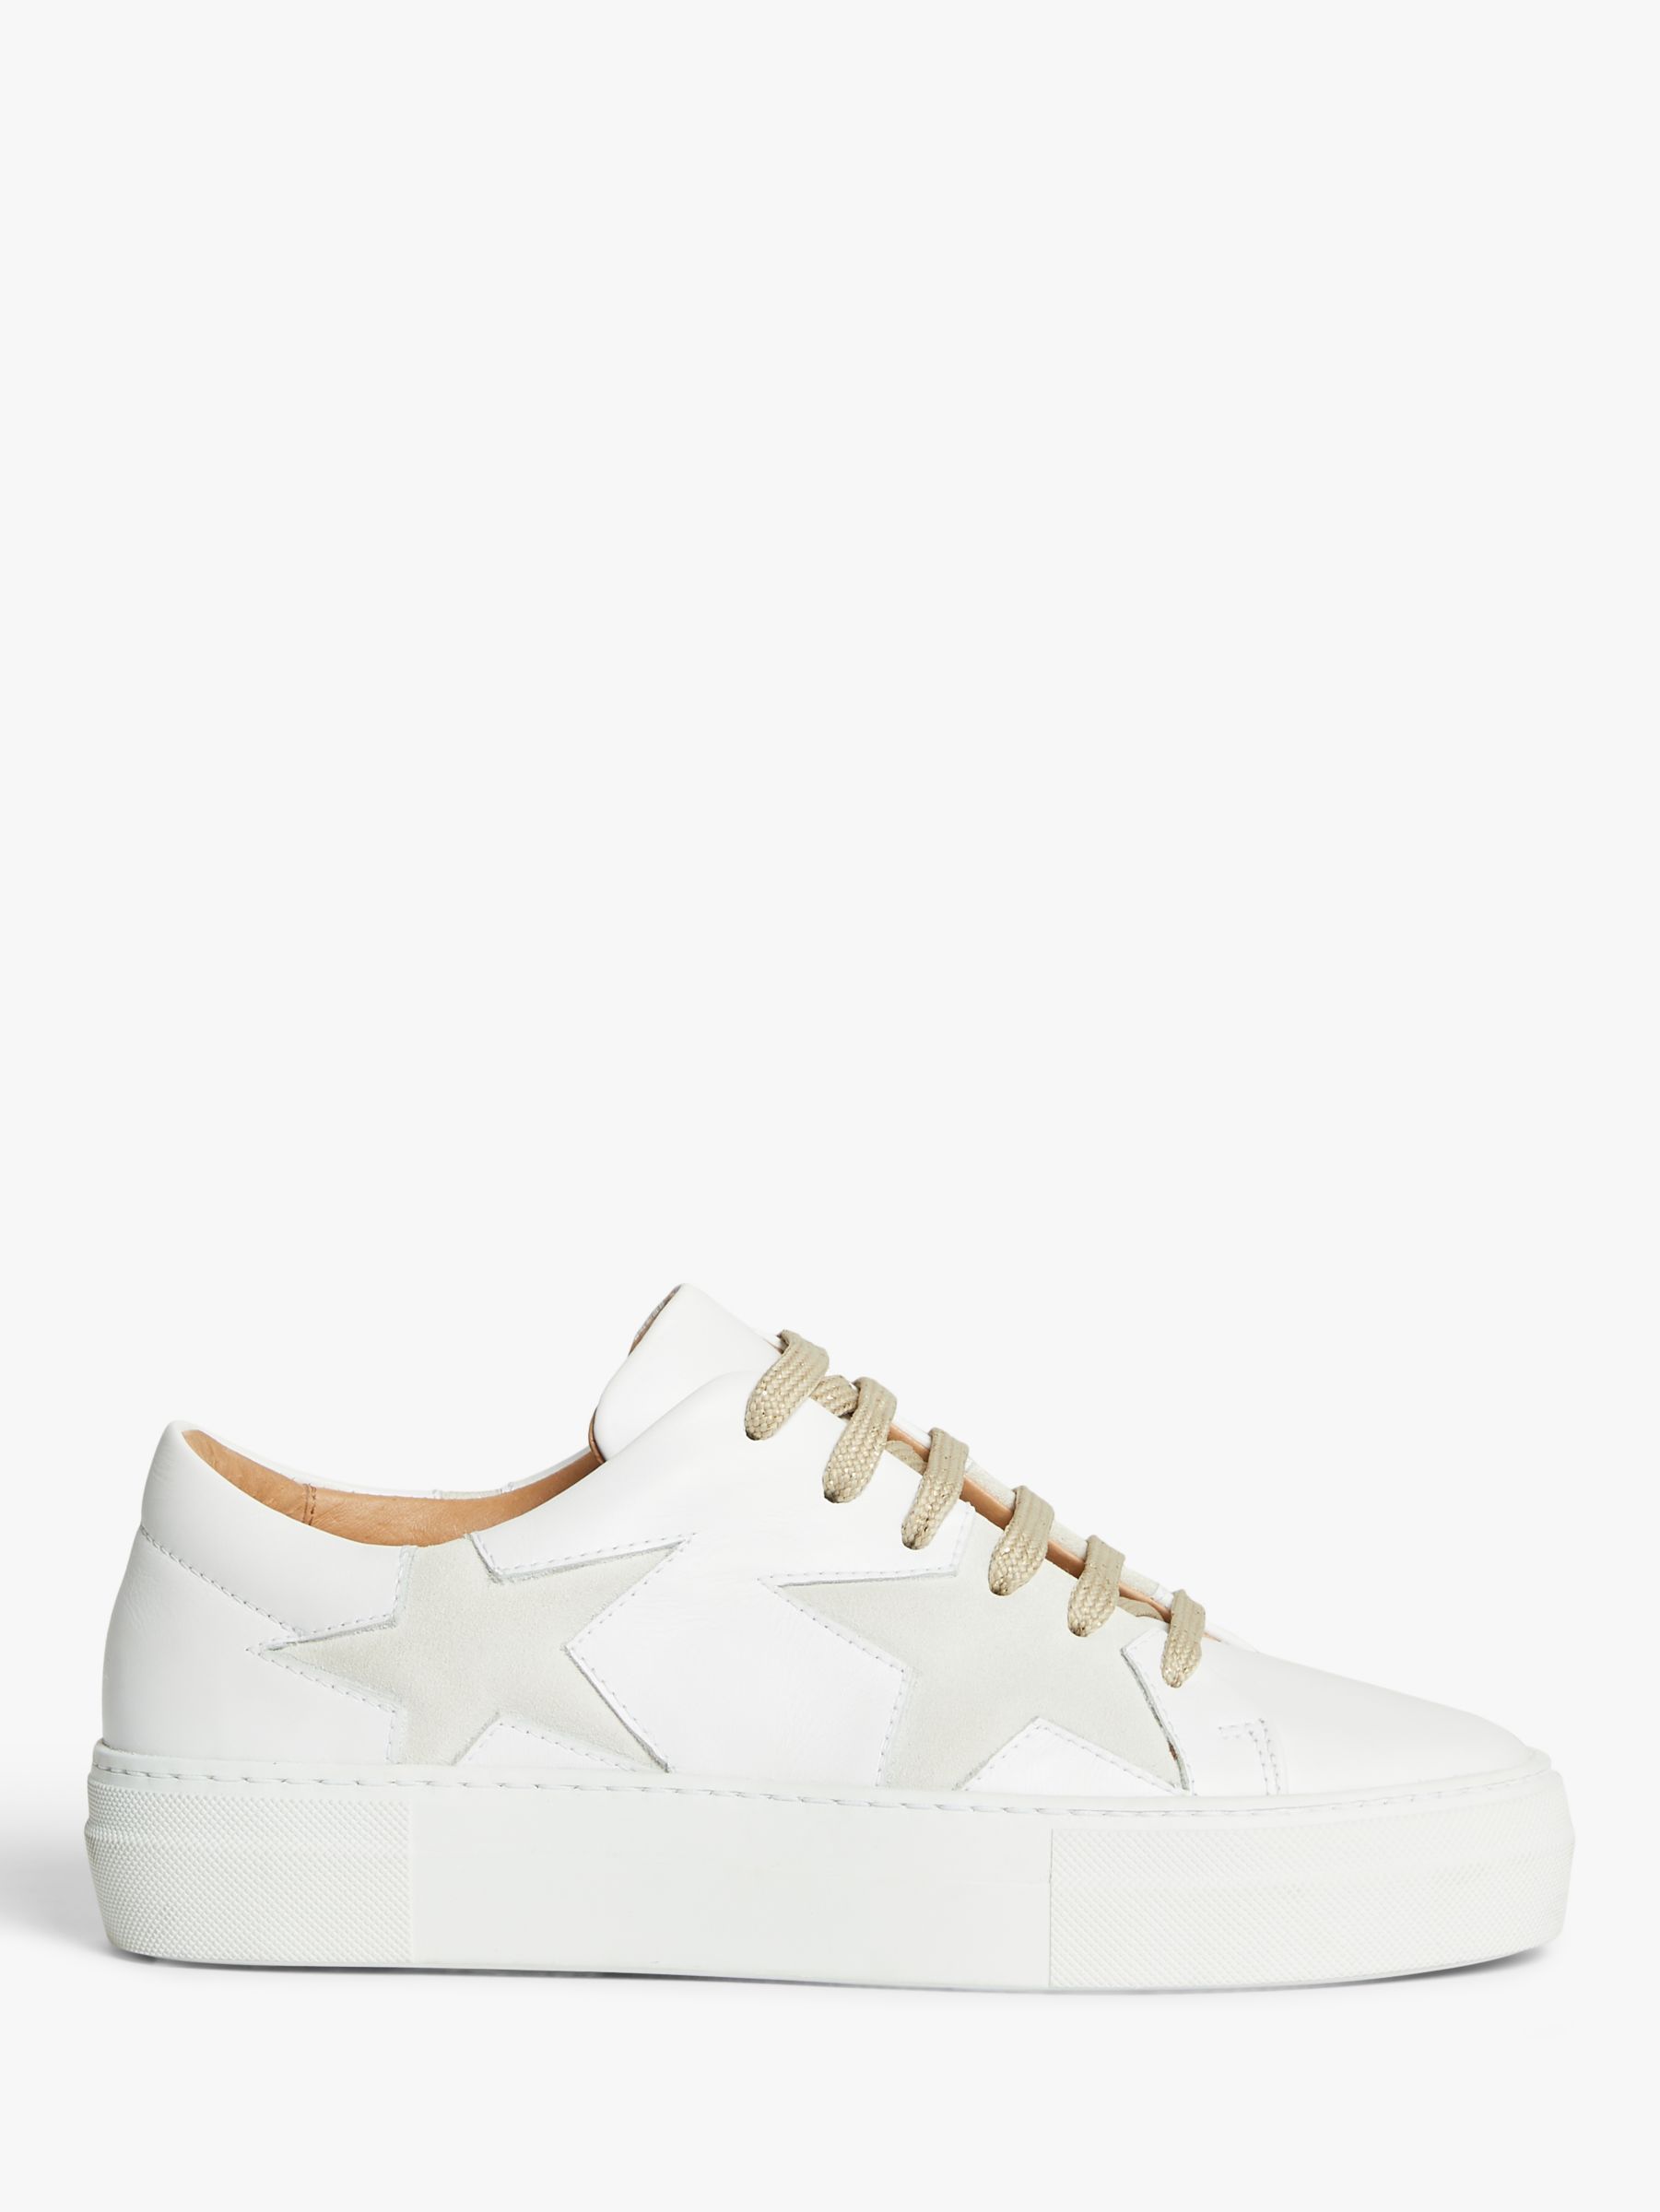 AND/OR Eddie Star Leather Trainers, White/Gold | John Lewis (UK)